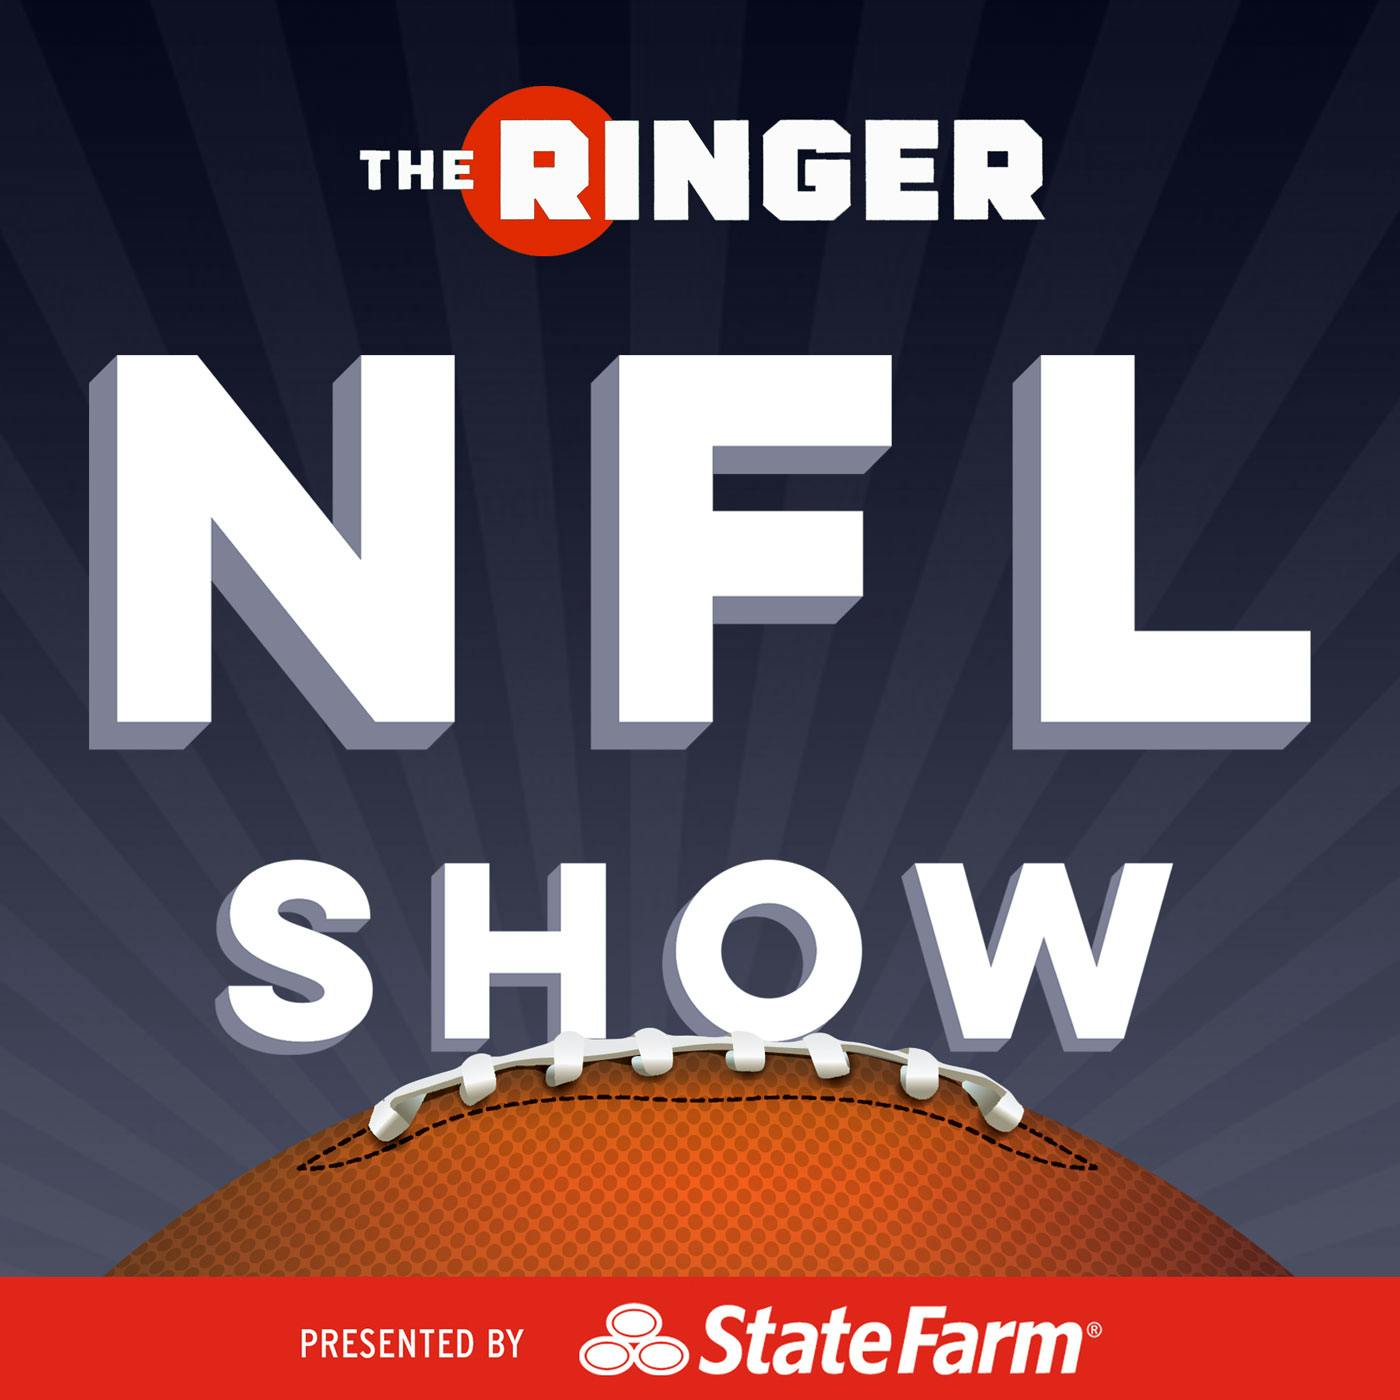 Lamar vs. Mahomes, Brees's Slow Start With Terez Paylor, and Take Mulligans | The Ringer NFL Show